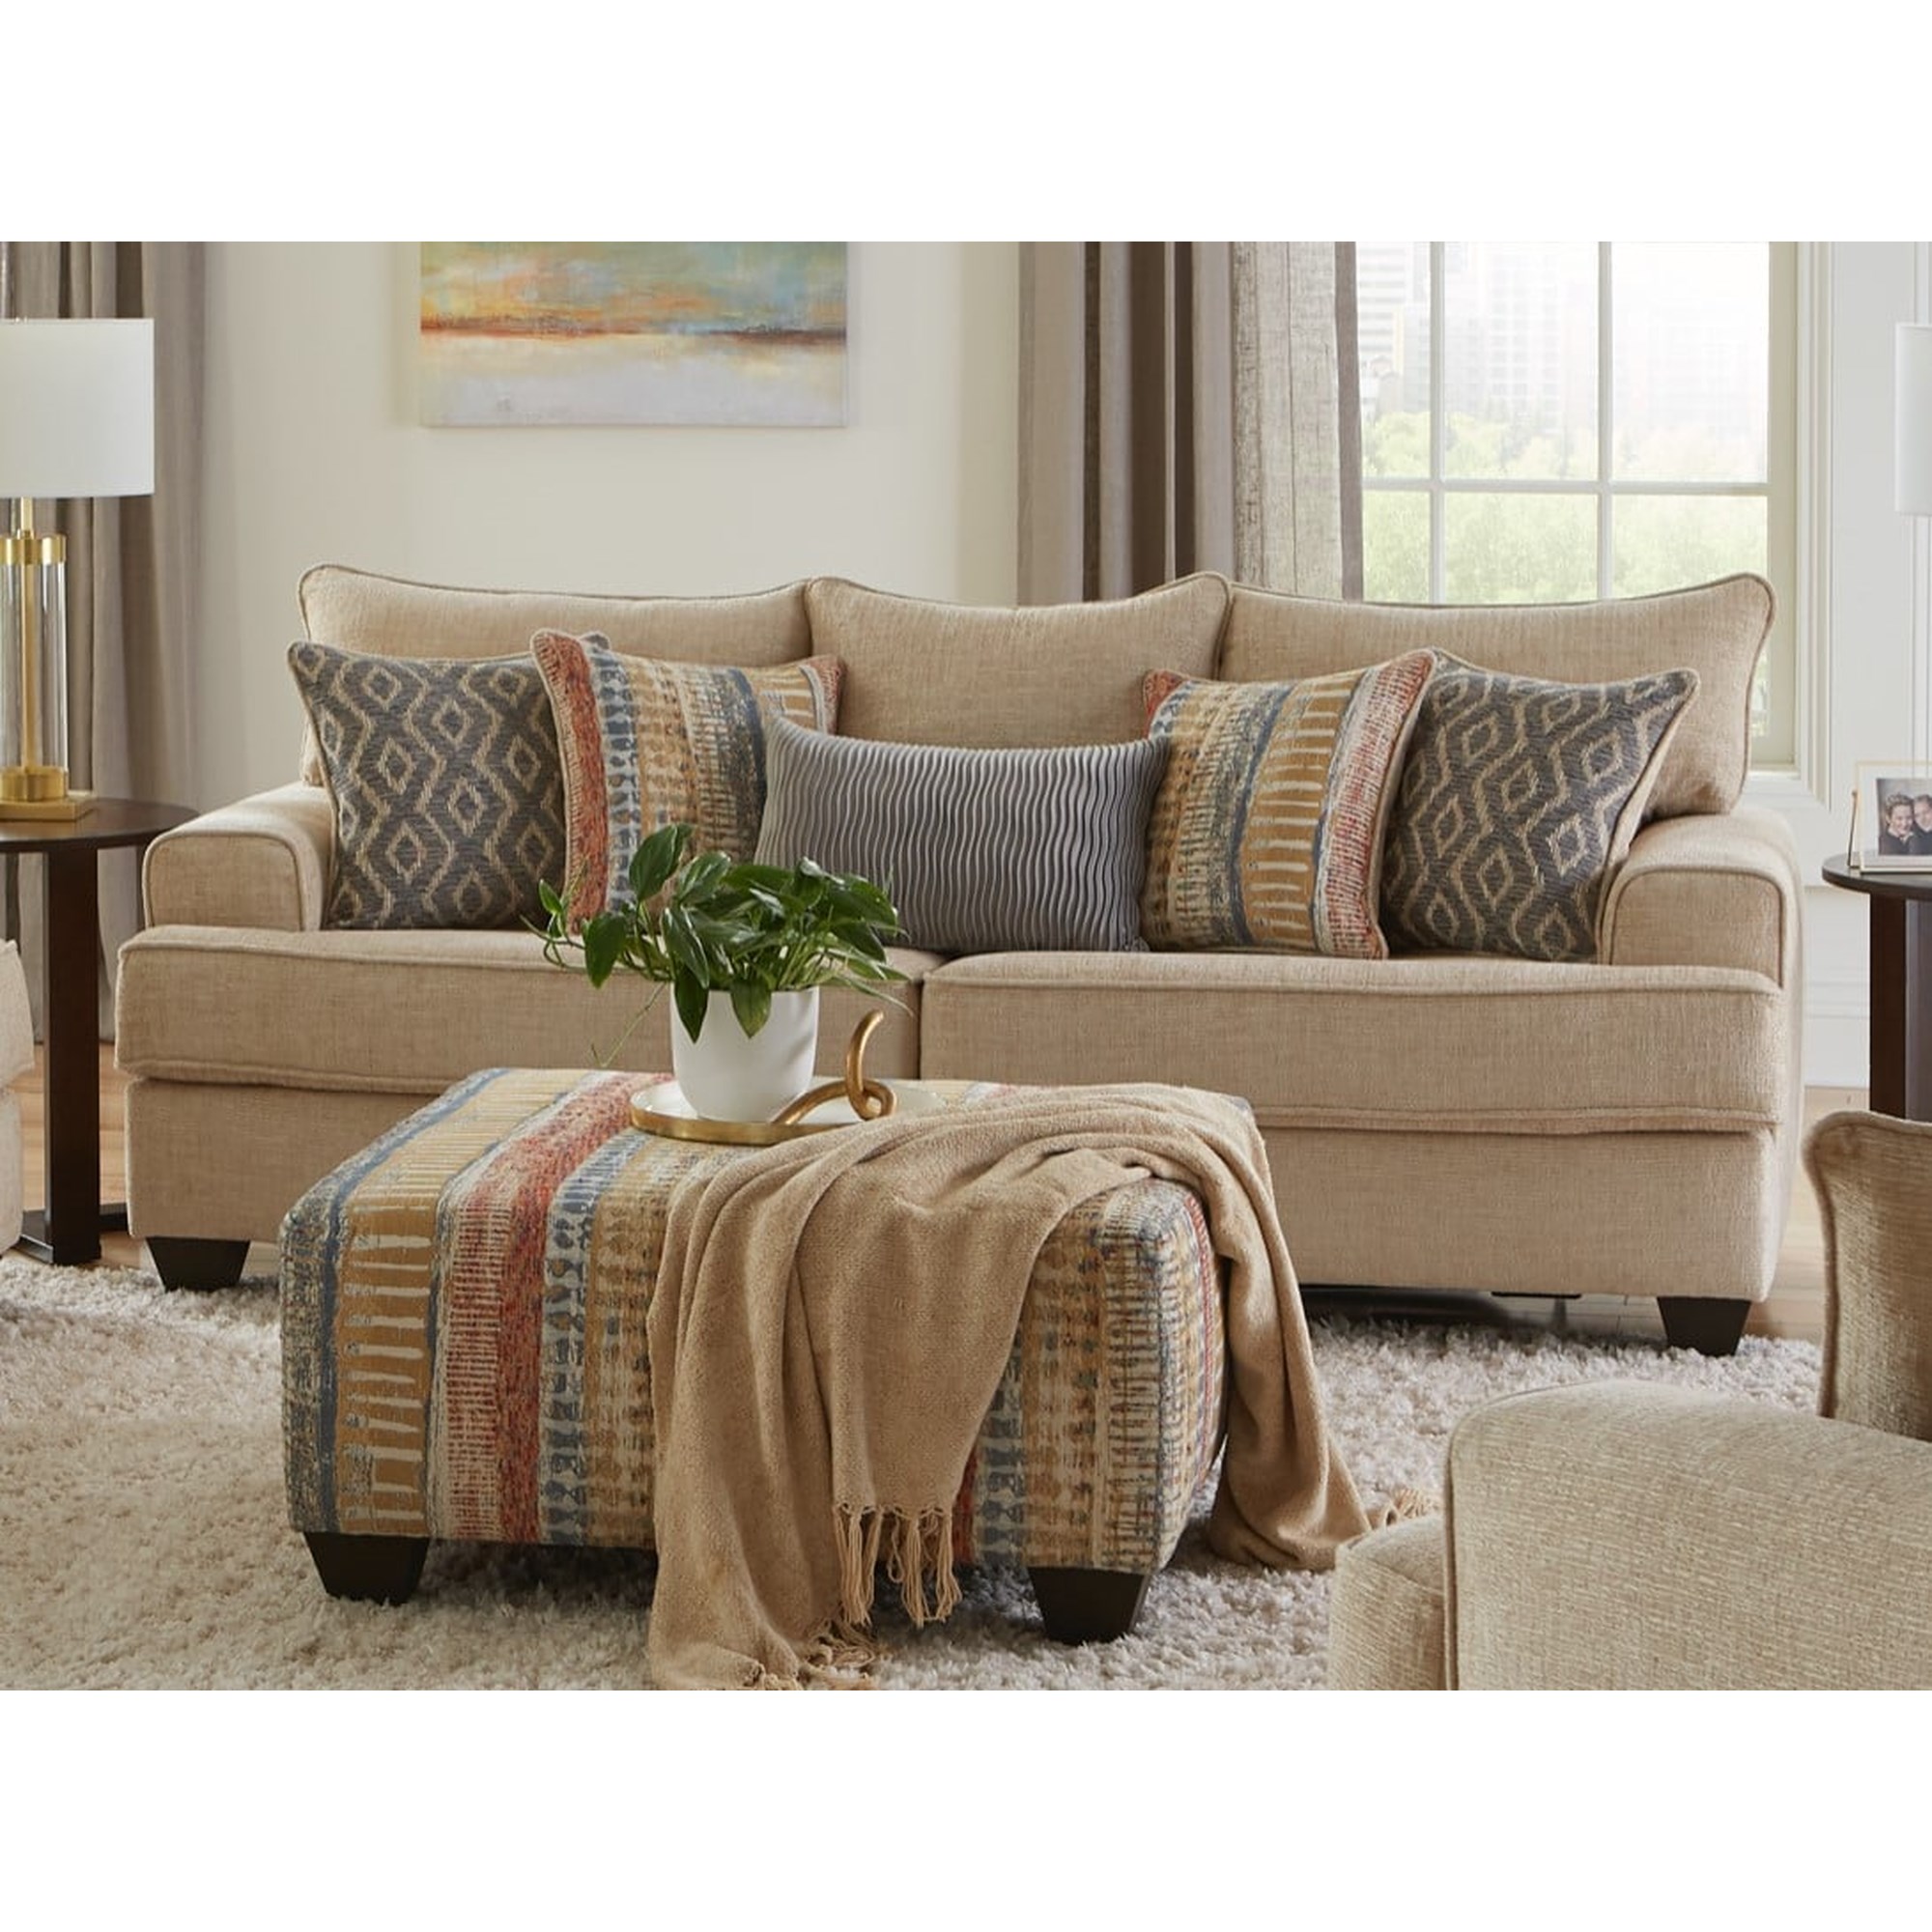 Albany Sandstone 427-00-GENS-20586 Sofa with Accent Pillows